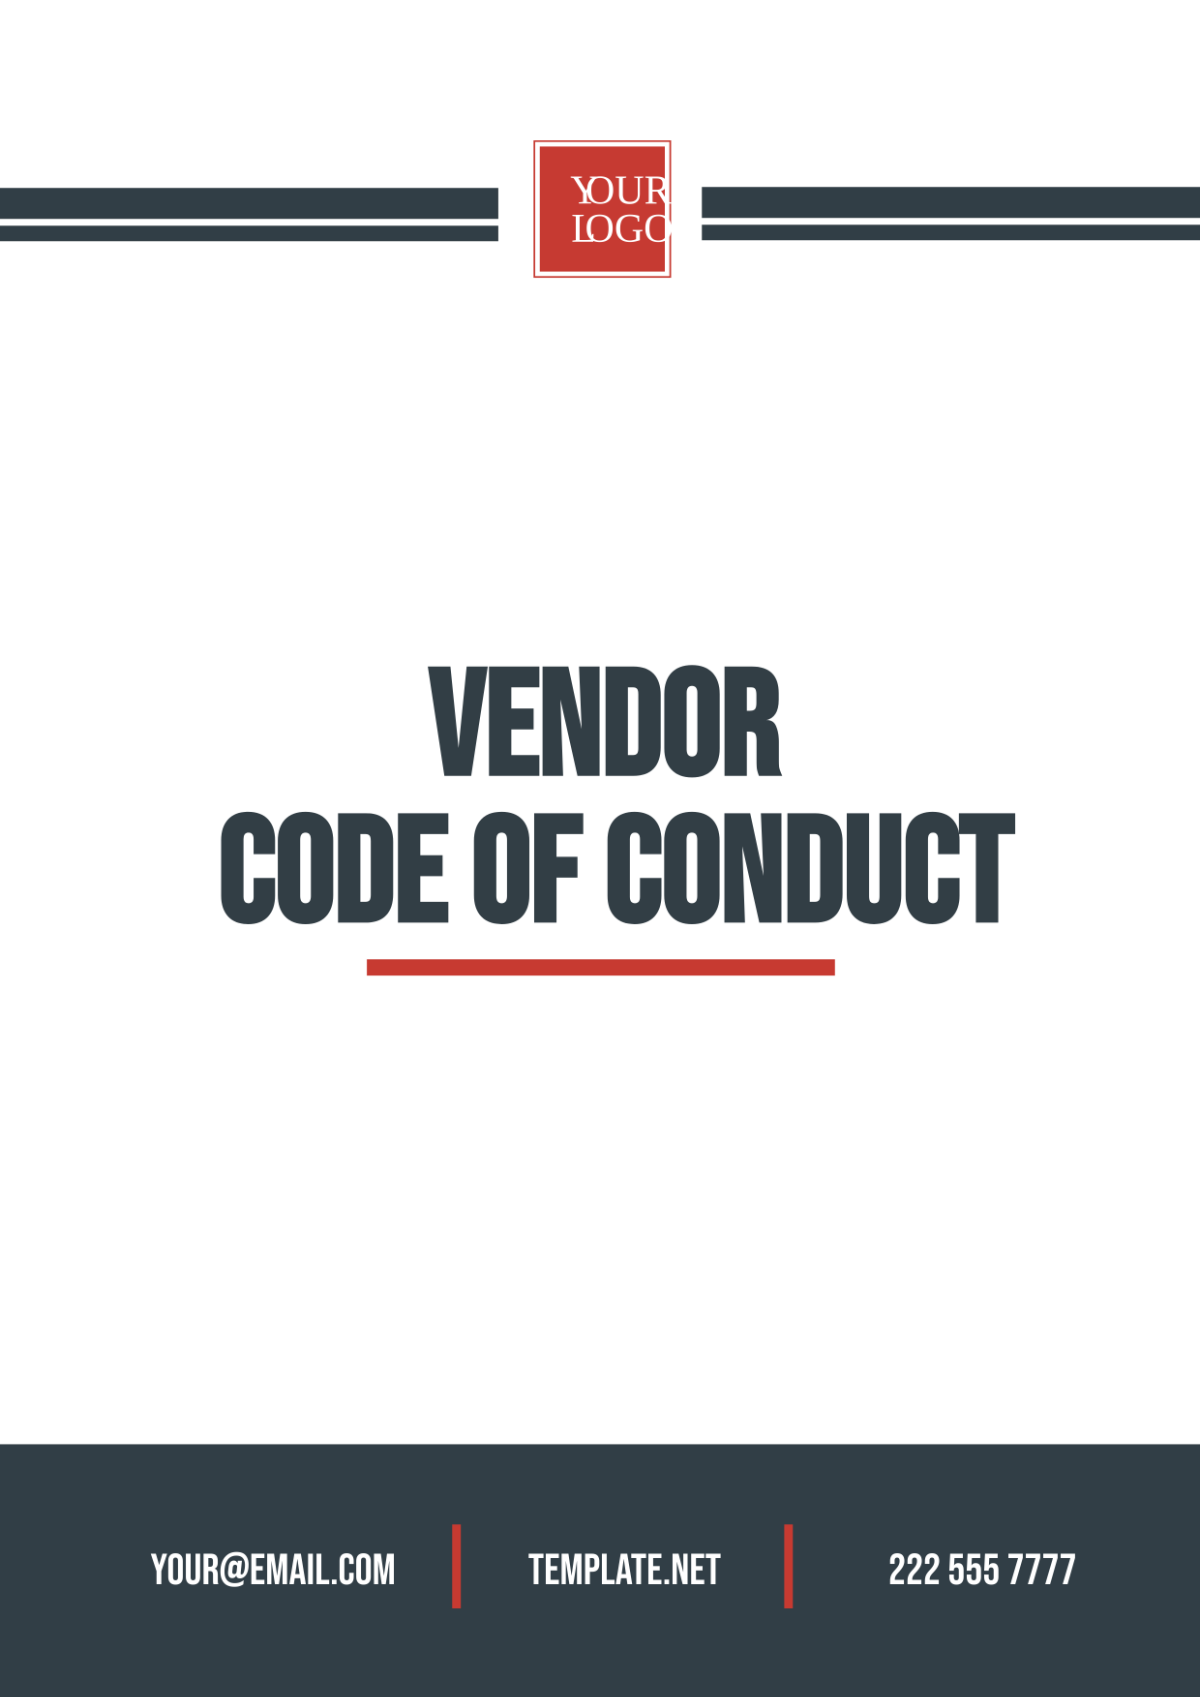 Free Vendor Code of Conduct Template